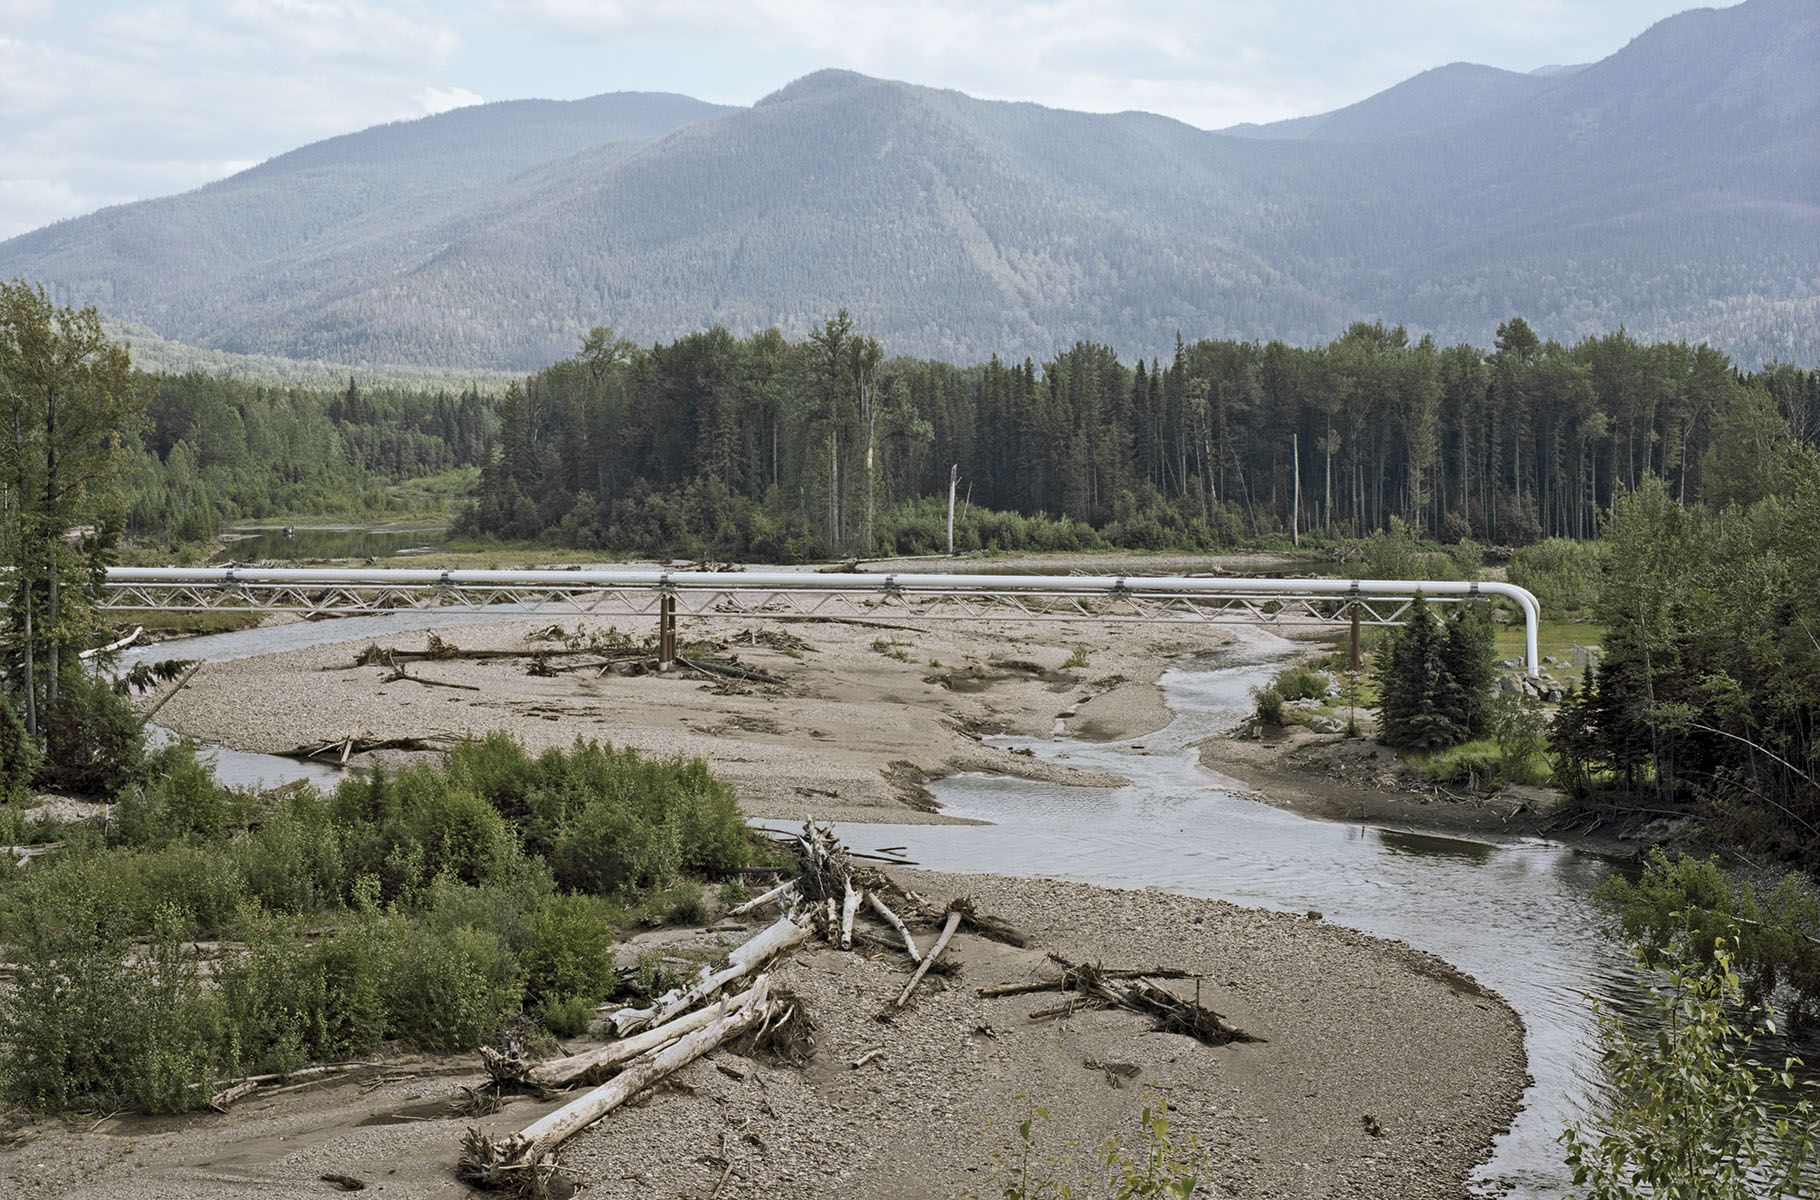 A Spectra Energy pipeline crosses the Pine River in northern British Columbia. Image by Jim McAuley. Canada, 2017.